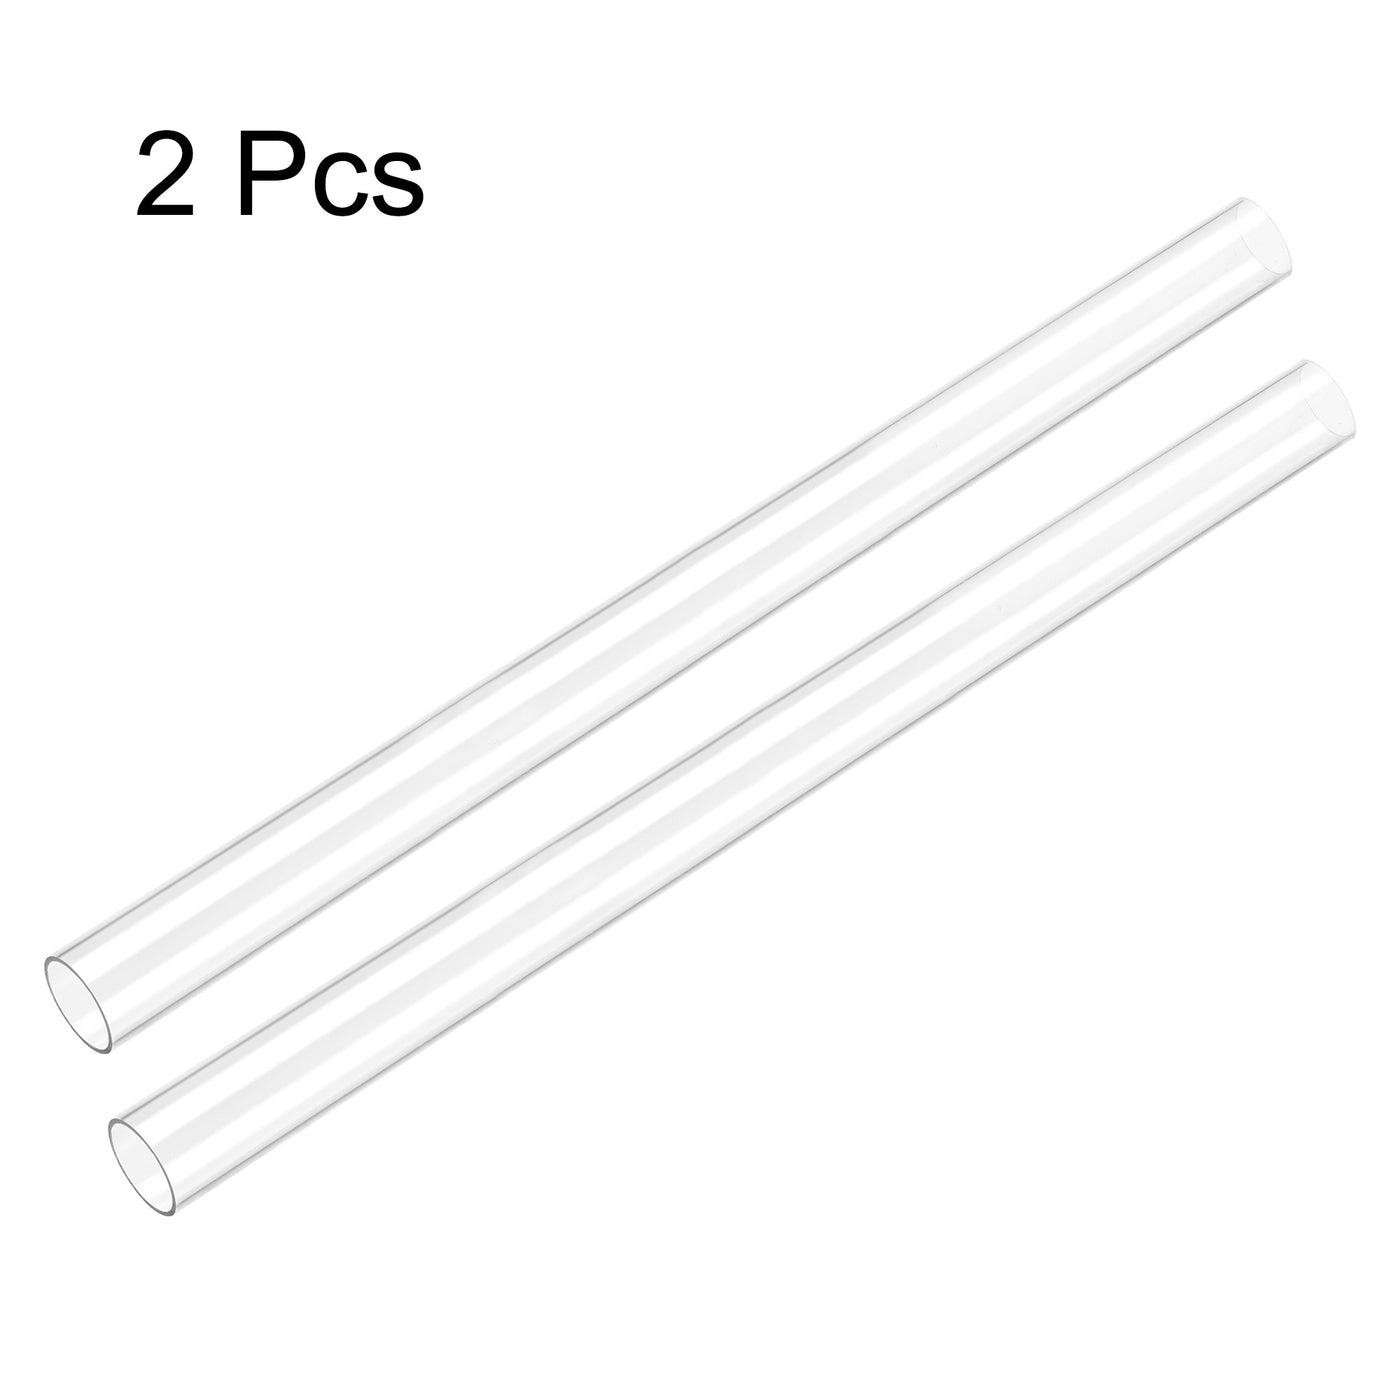 uxcell Uxcell Polycarbonate Rigid Round Clear Tubing 22mm(0.86 Inch)IDx25mm(0.98 Inch)ODx500mm(1.64Ft) Length Plastic Tube 2pcs